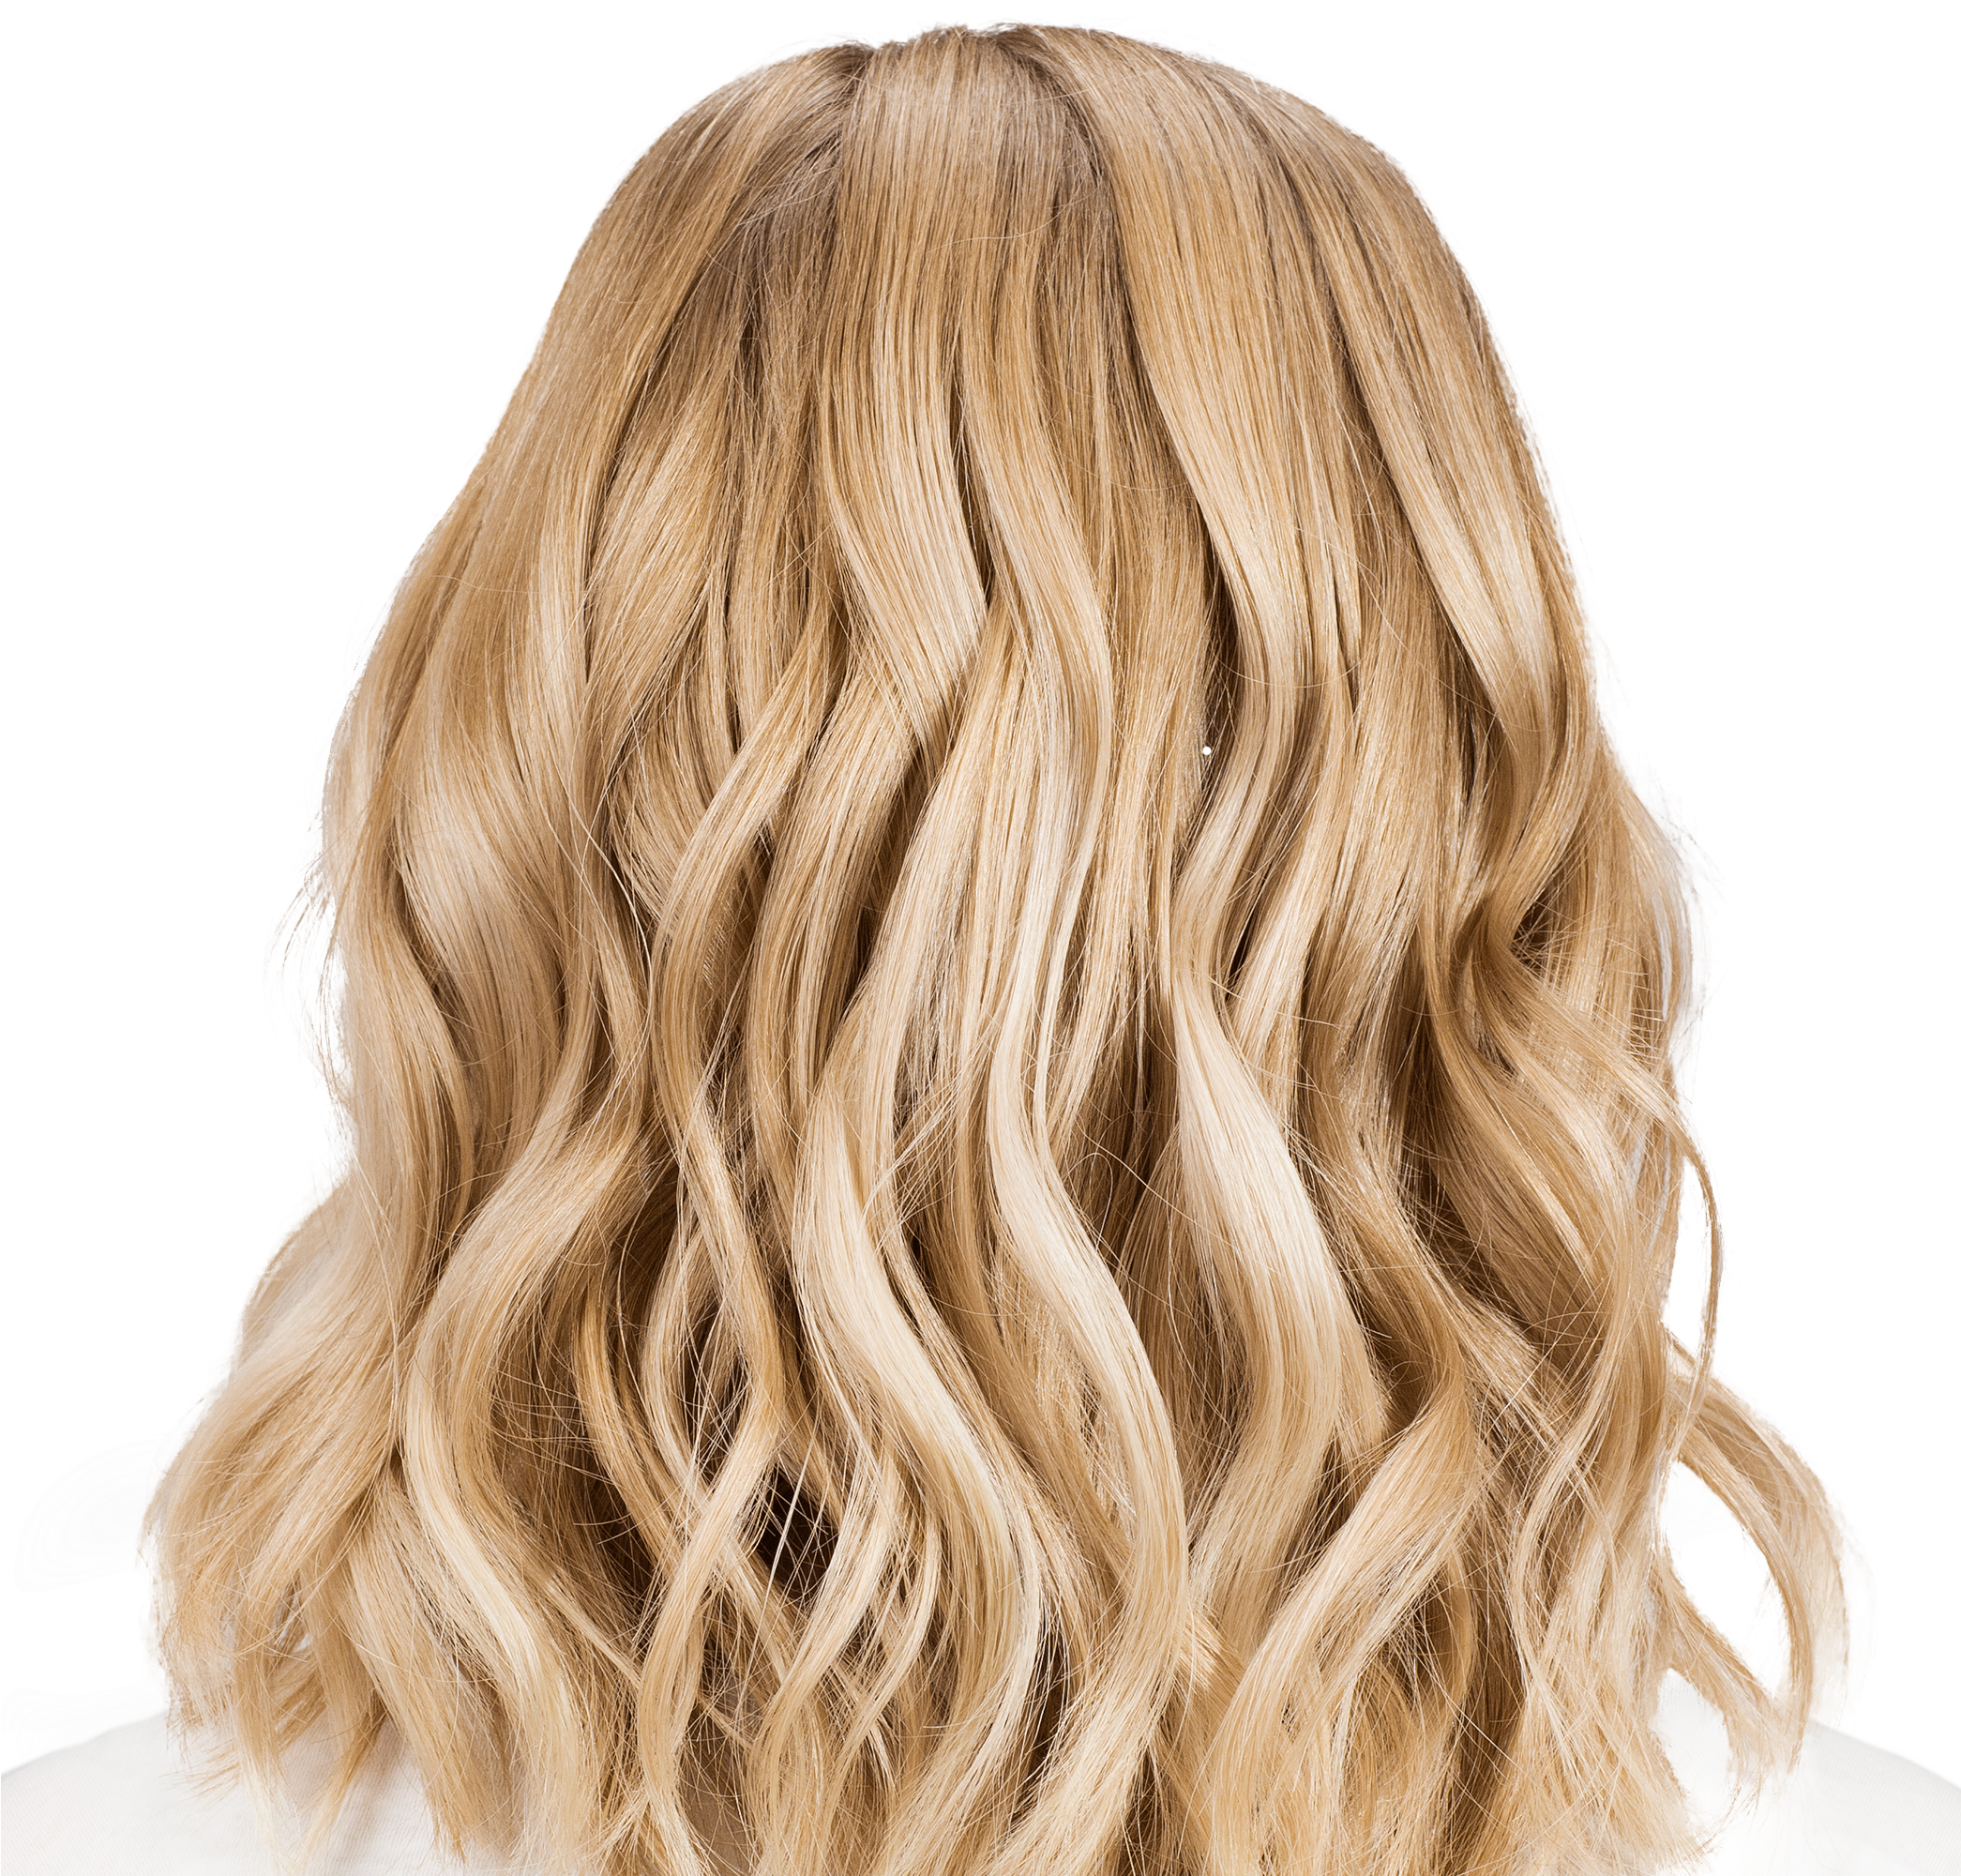 Blonde Hair PNG Clipart